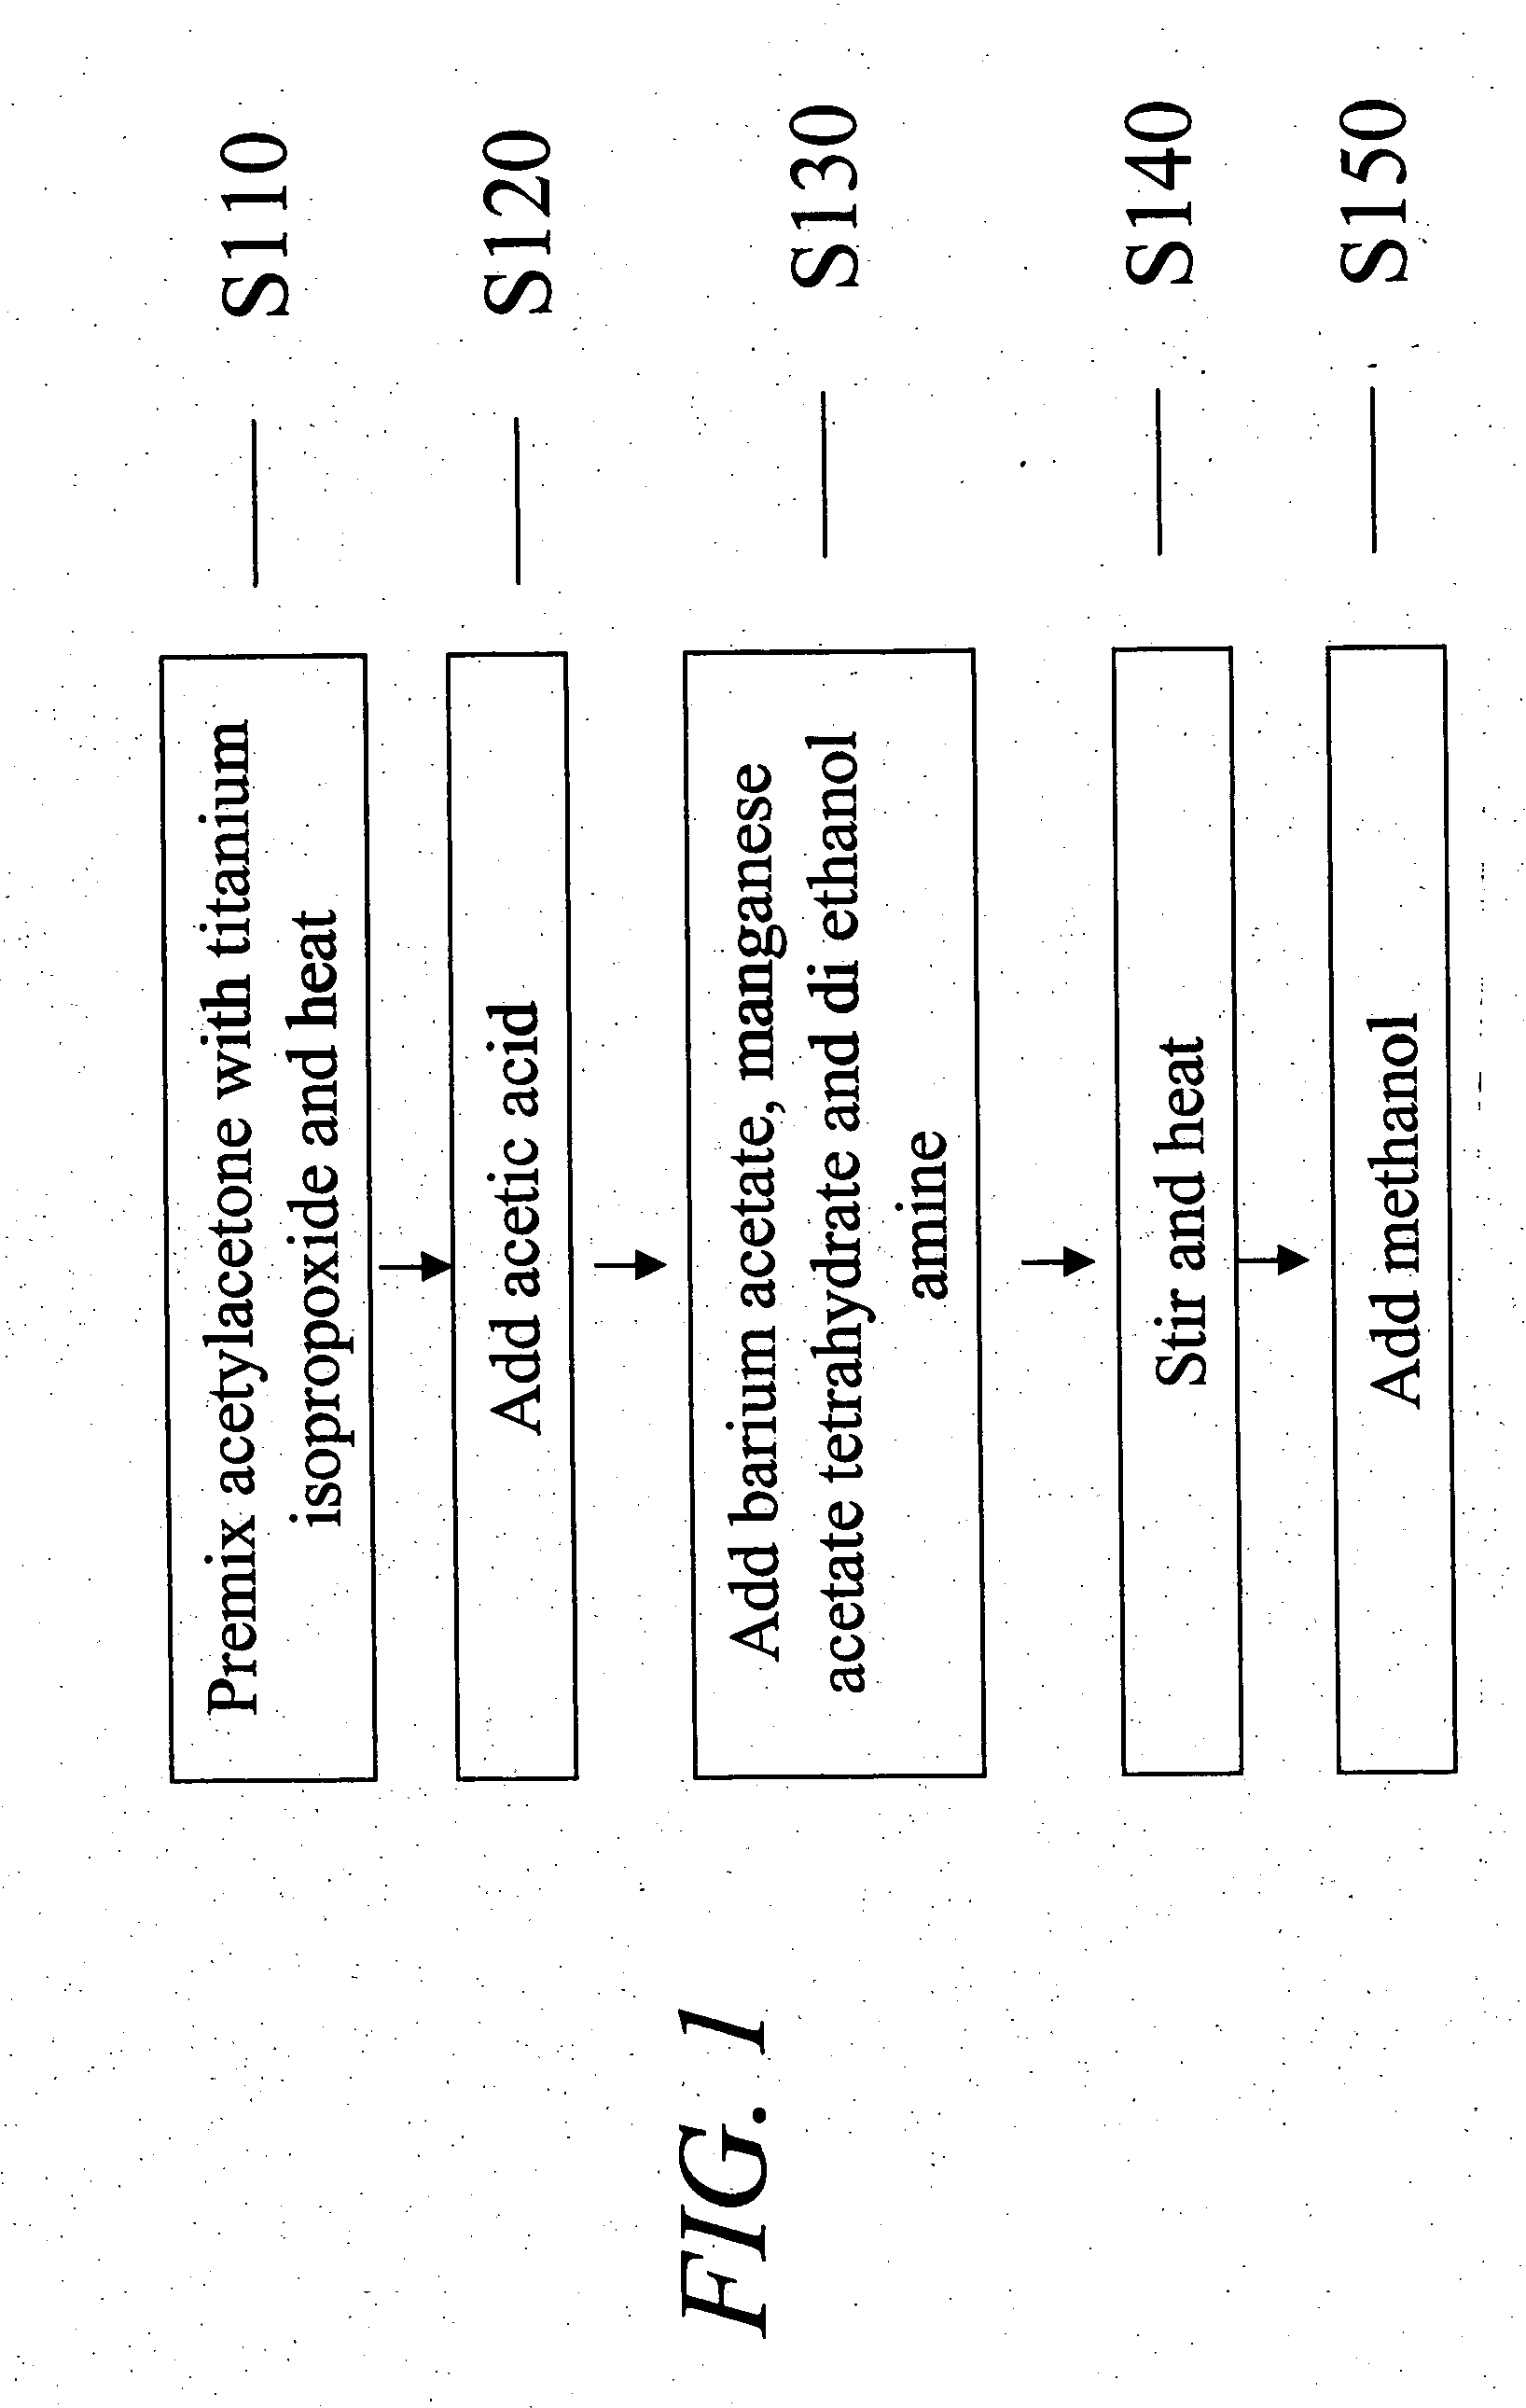 Manganese doped barium titanate thin film compositions, capacitors, and methods of making thereof